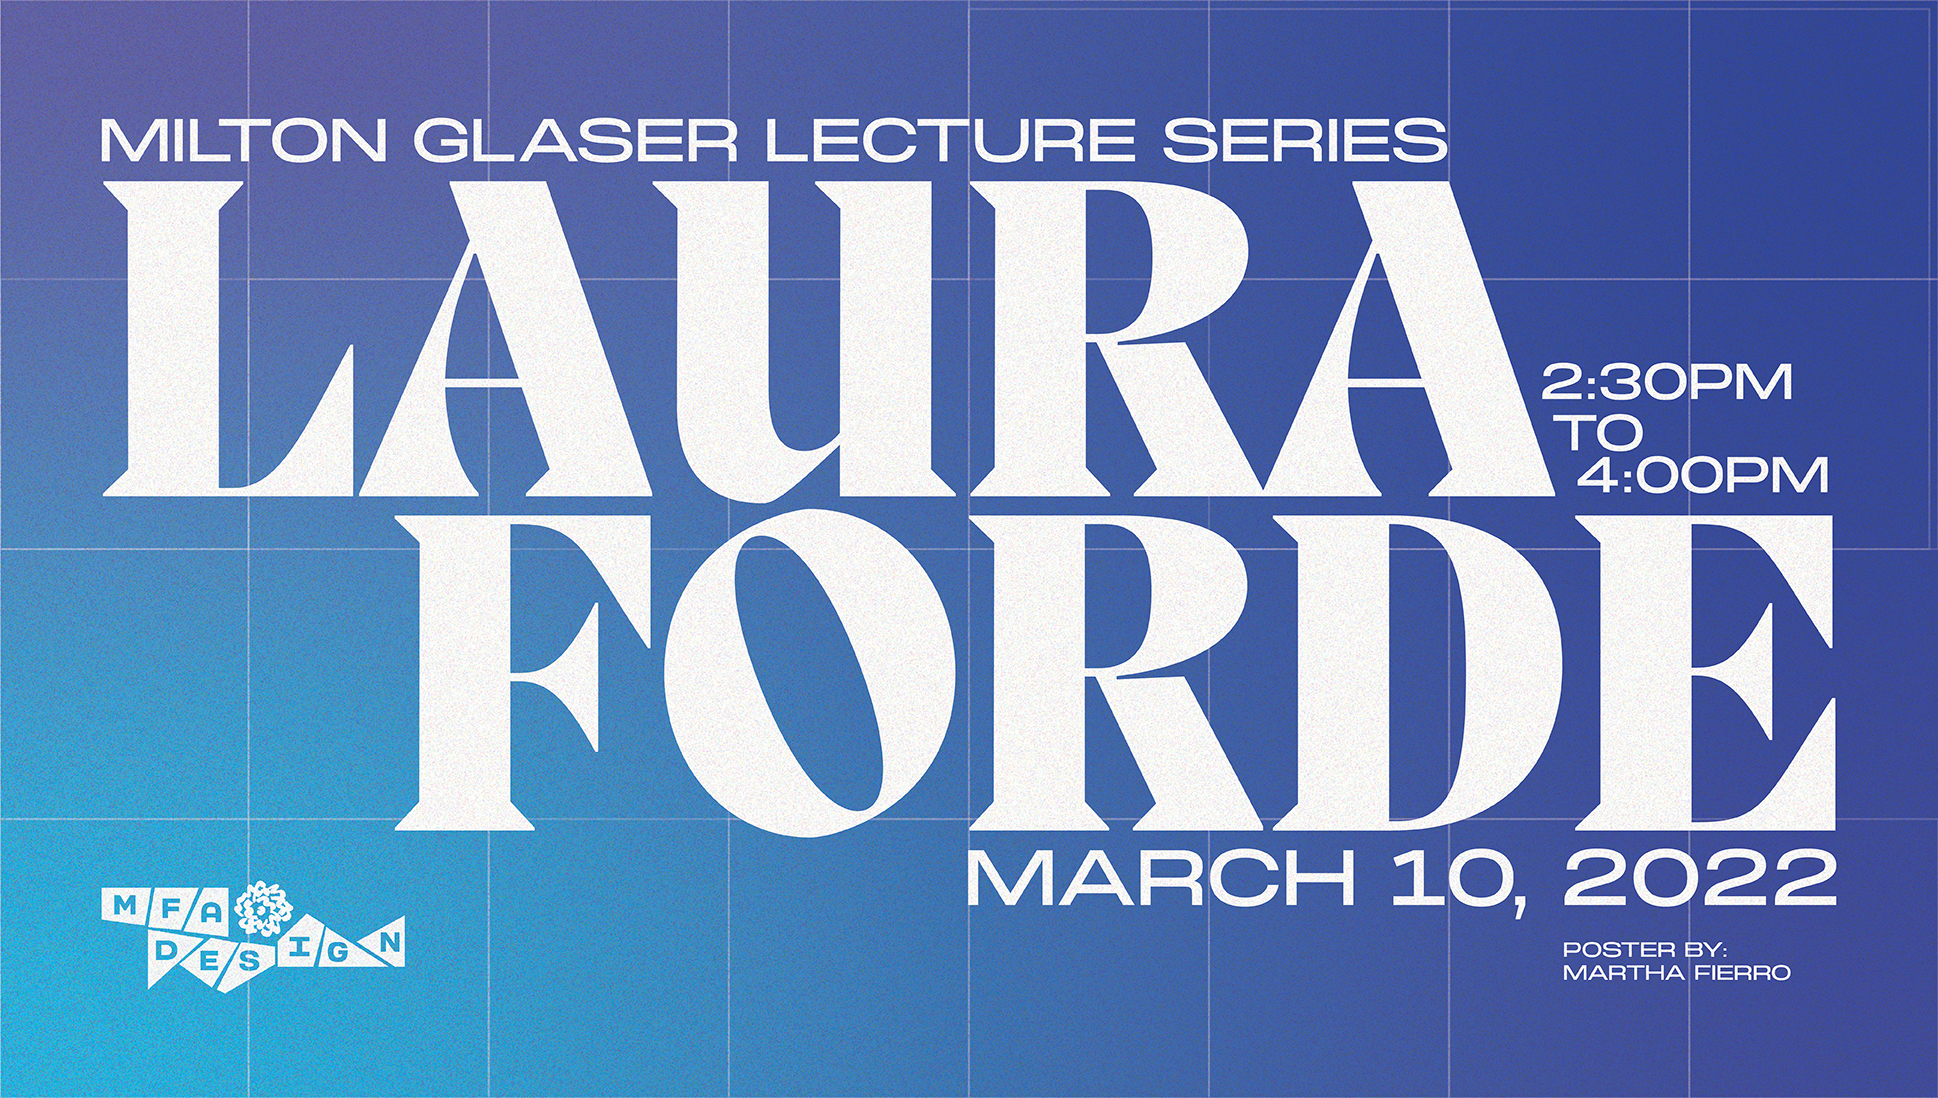 Milton Glaser lecture series Laura Forde event poster on blue background with a lighter blue radial light ion the lower-left corner